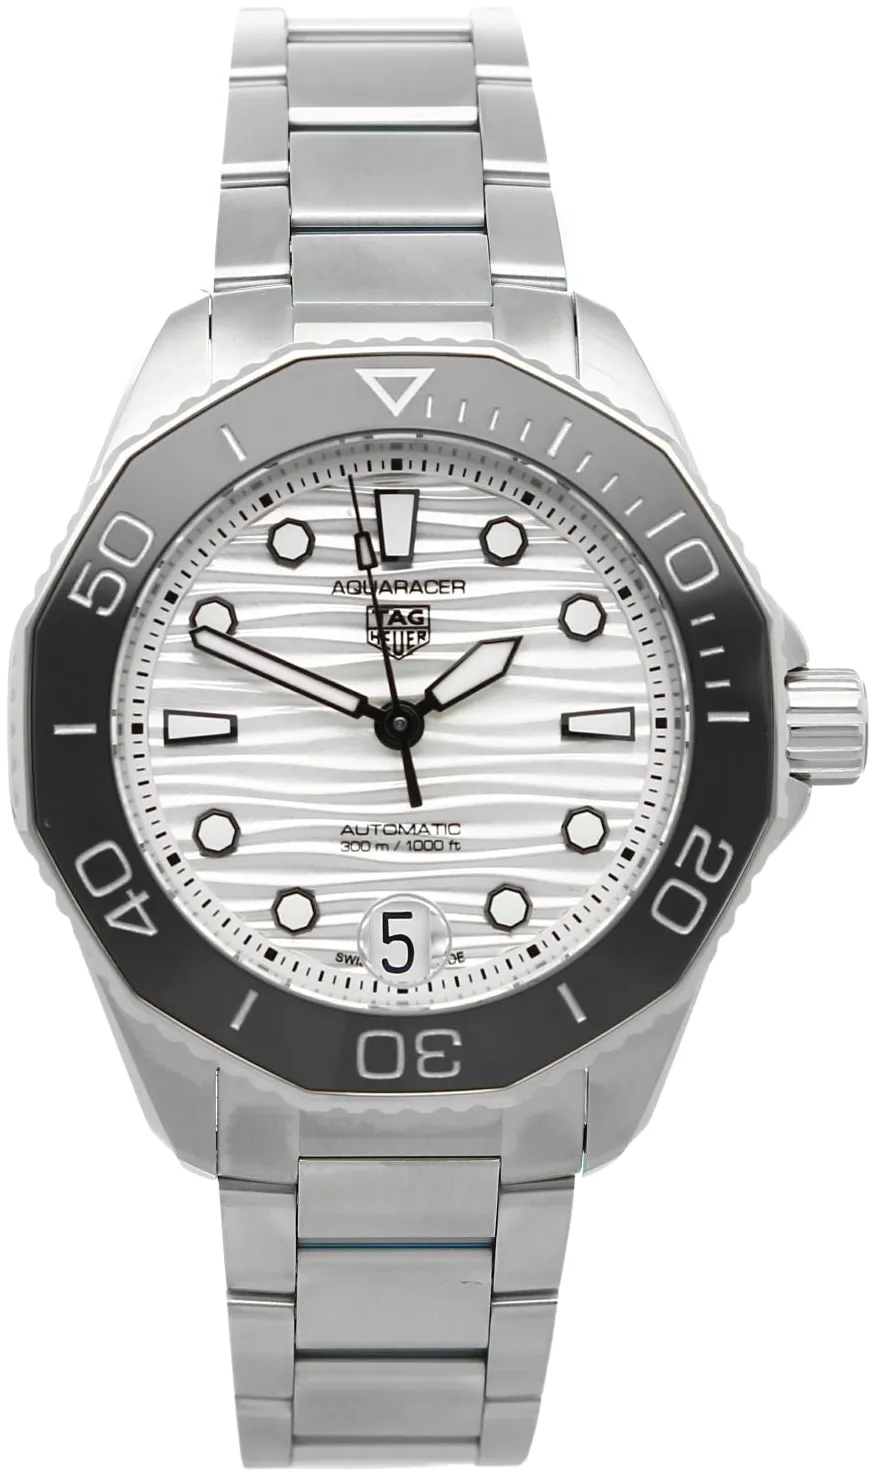 TAG Heuer Aquaracer WBP231C.BA0626 36mm Stainless steel Gray